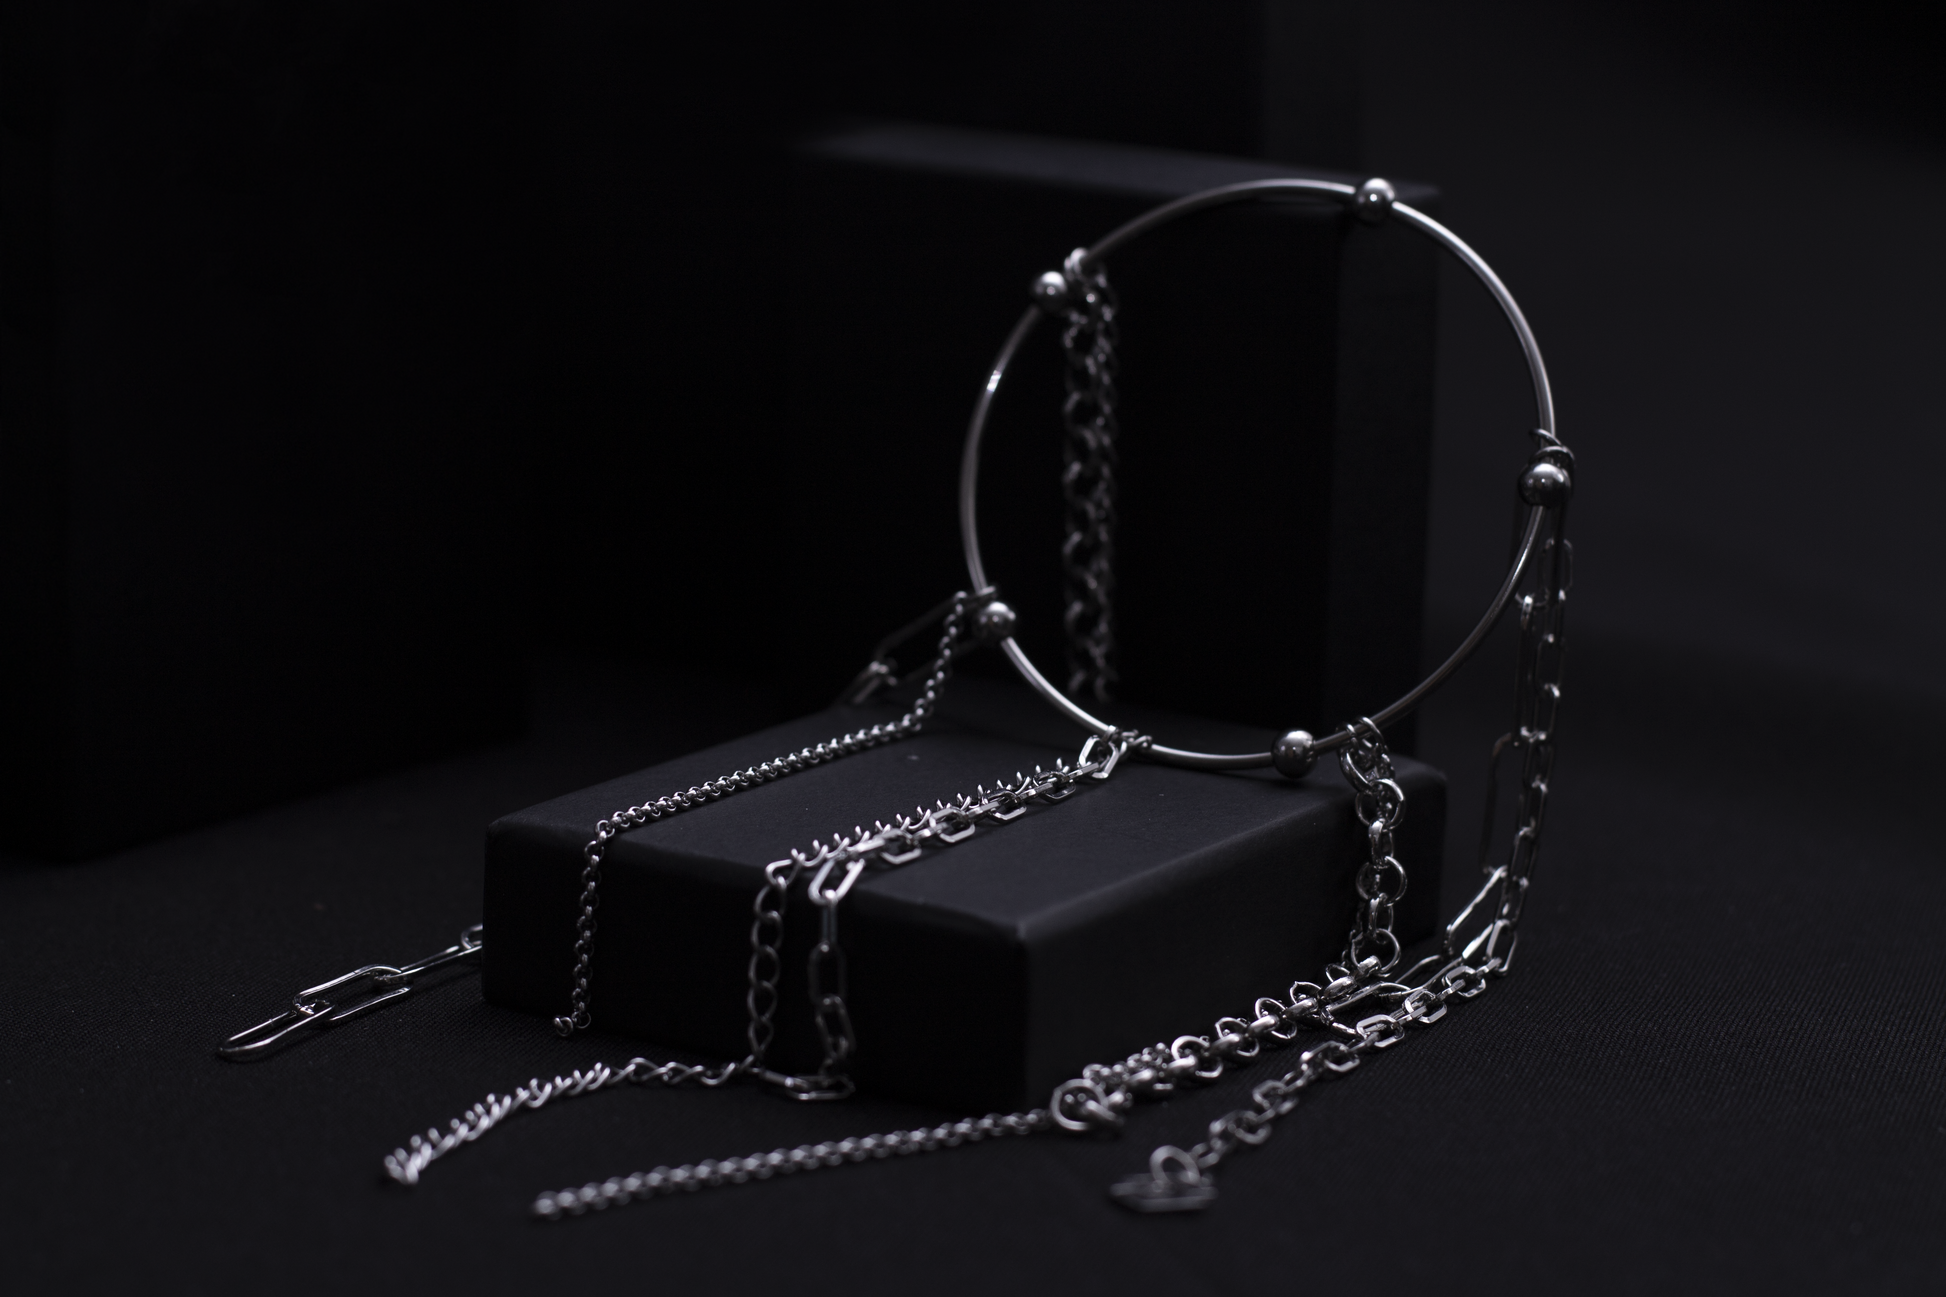 levate your gothic wardrobe with Myril Jewels' rigid bracelet adorned with delicate chains, embodying a darkly elegant neo-goth aesthetic, perfect for everyday wear or as a striking statement piece.